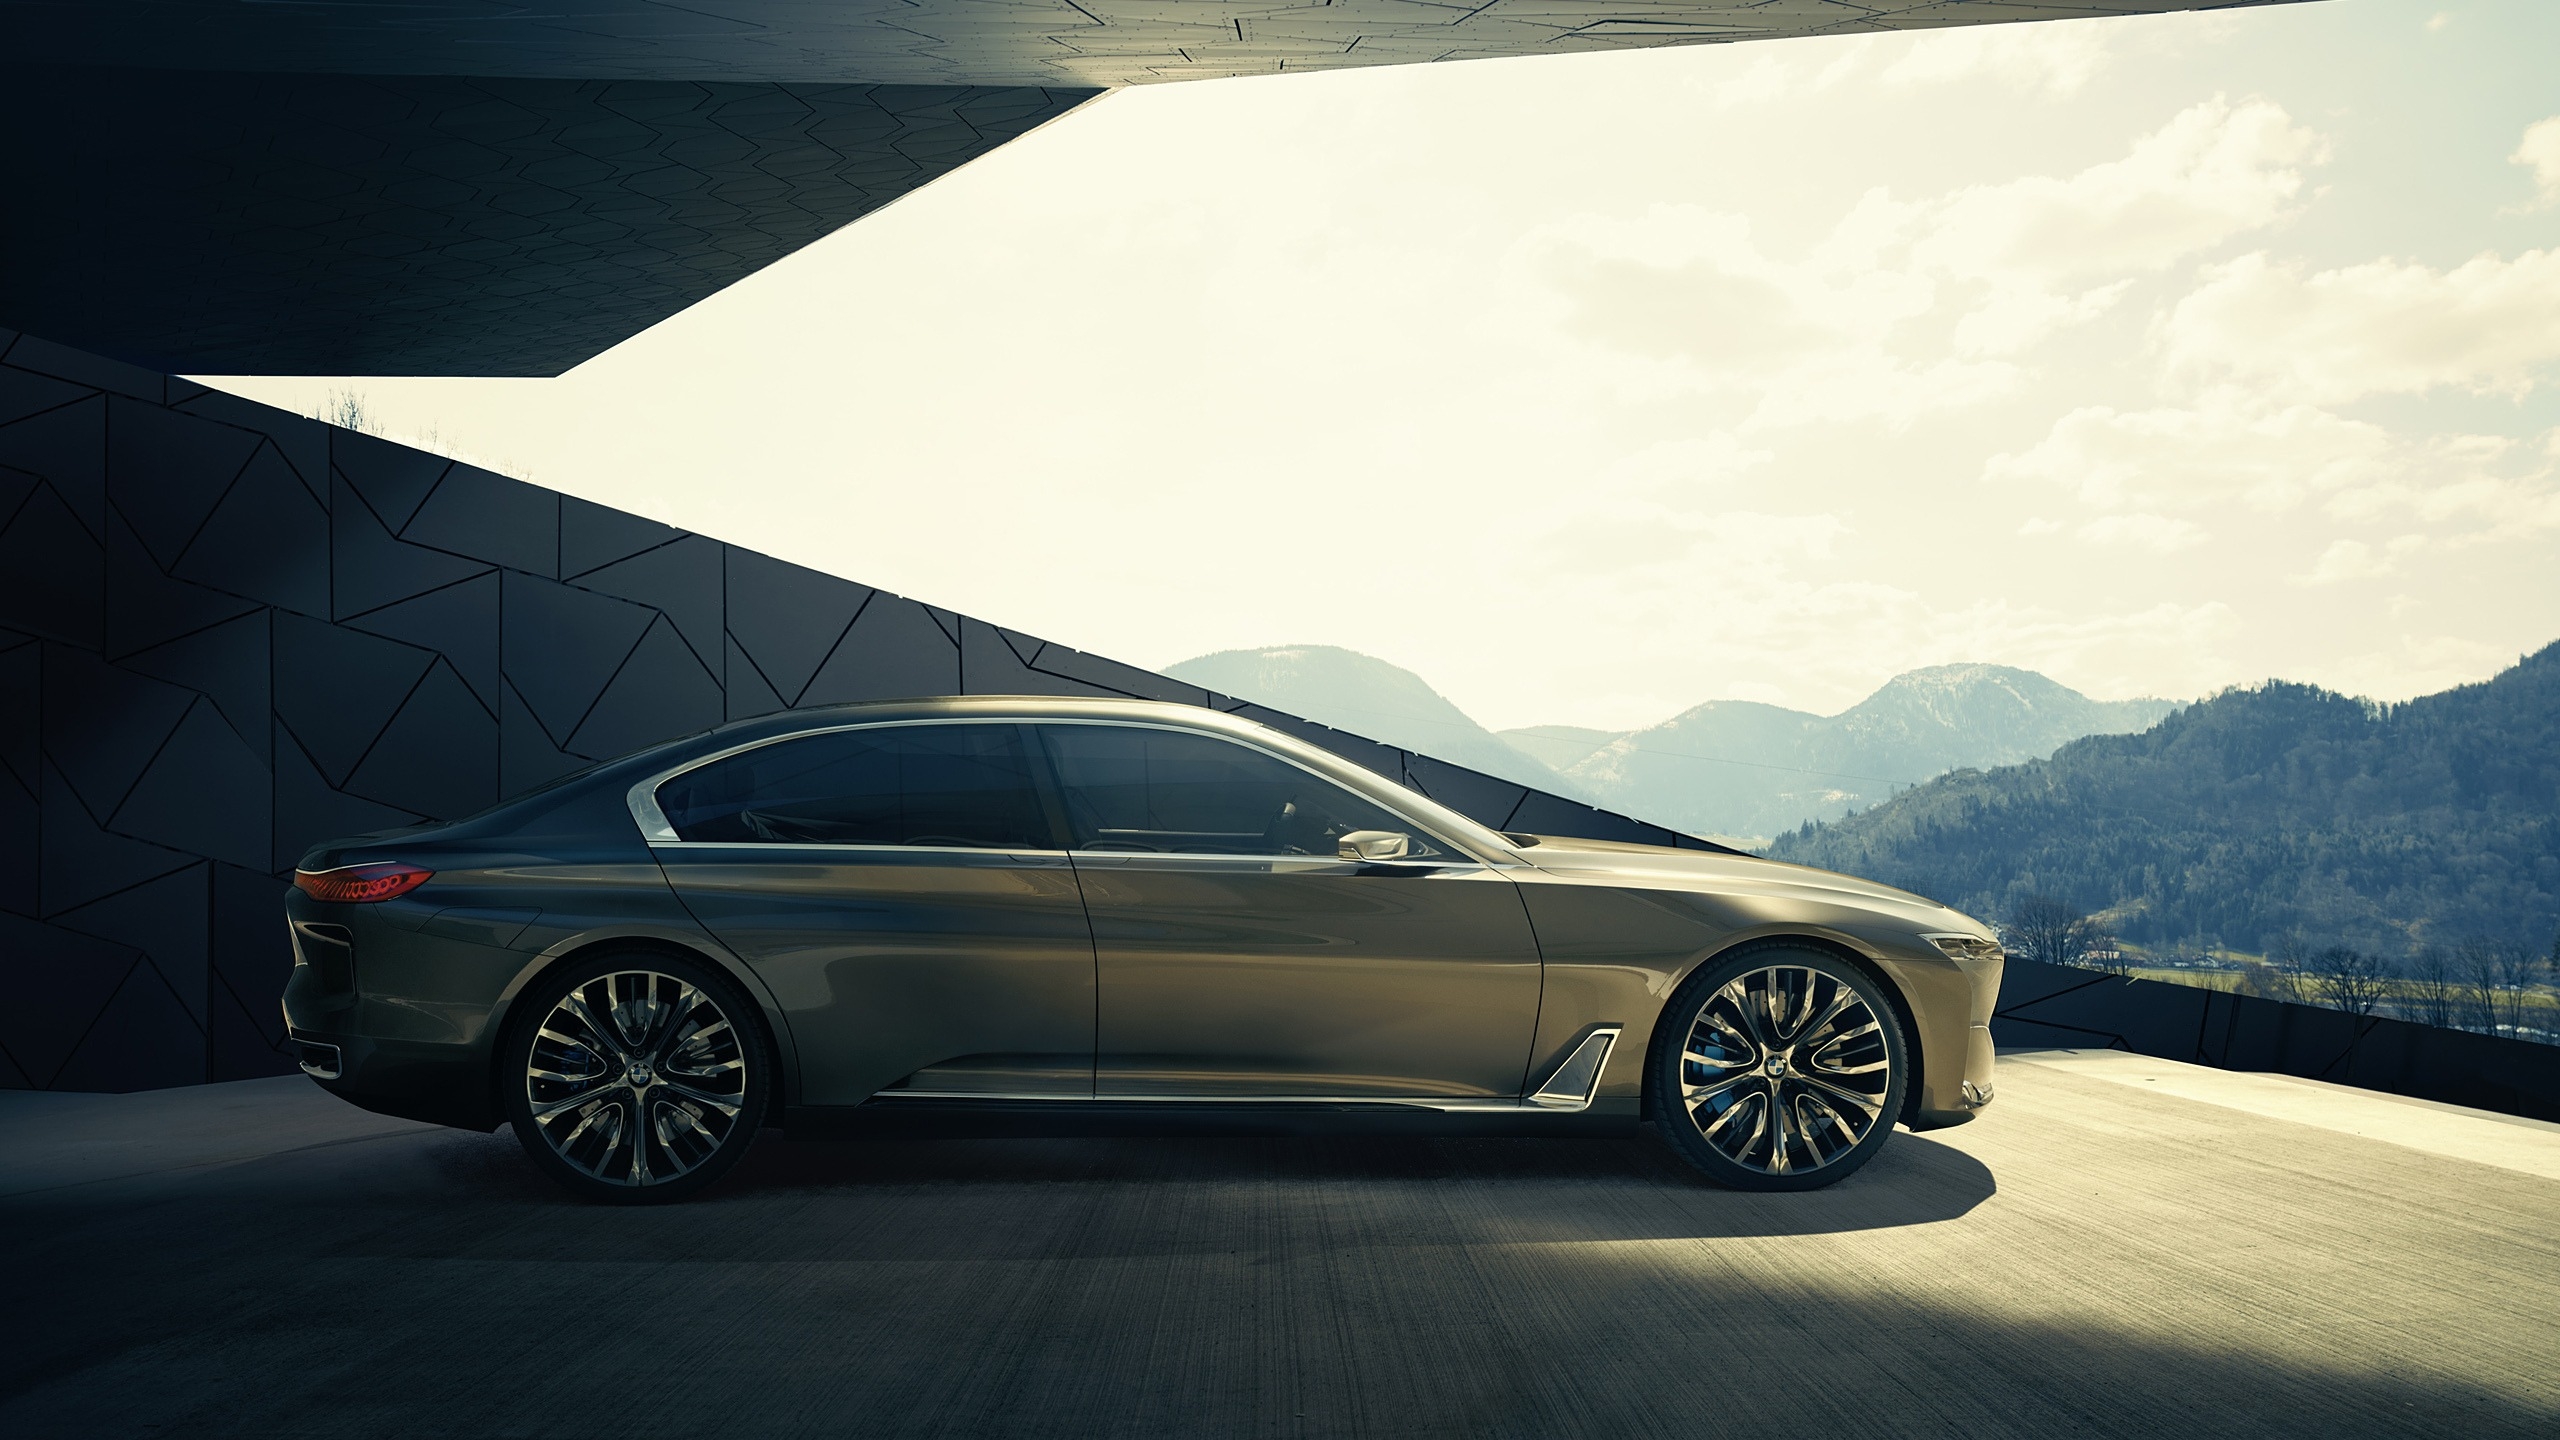 Luxury BMW Vision Concept for 2560x1440 HDTV resolution